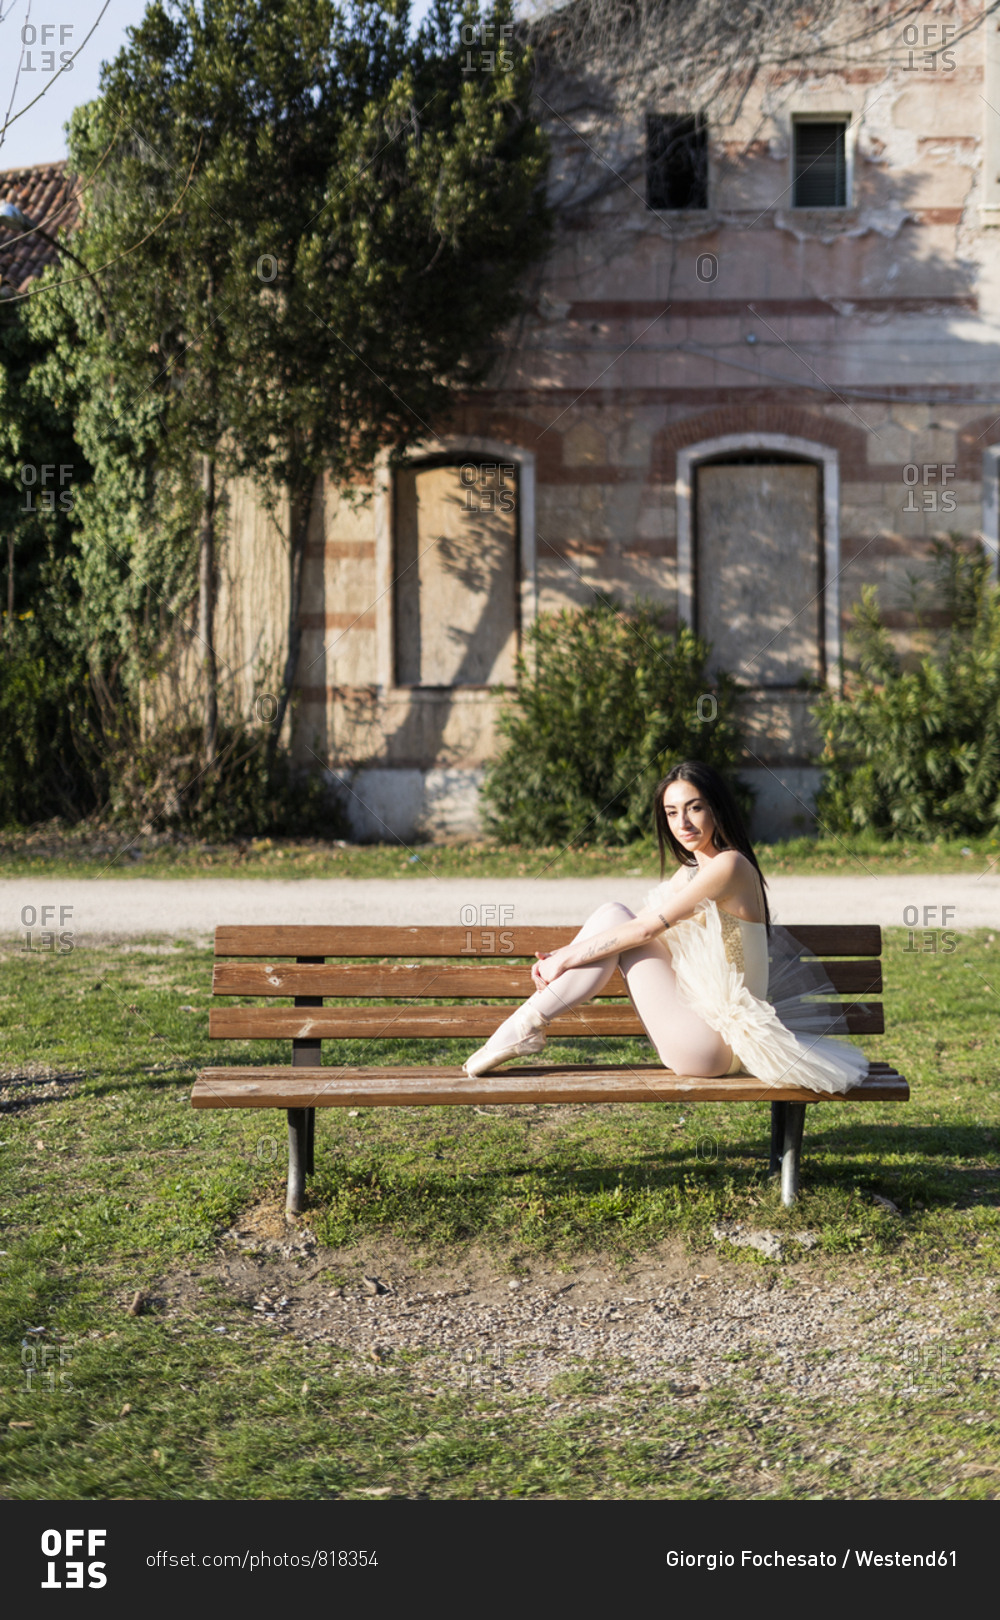 Italy- Verona- portrait of ballerina sitting on bench in the city